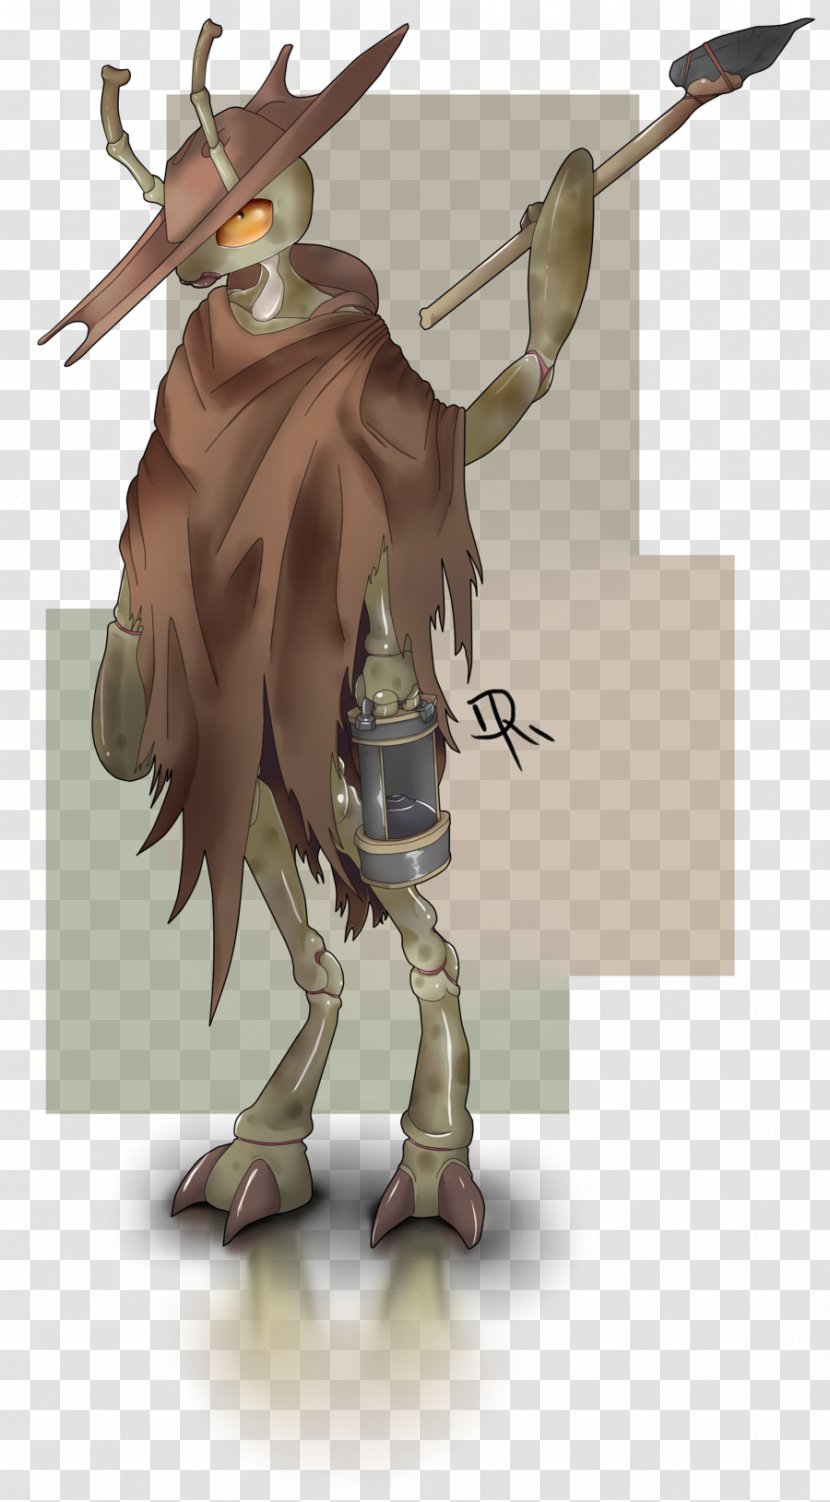 Dungeons & Dragons Thri-kreen Drawing Art Bard - Armour - Mythical Creature Transparent PNG